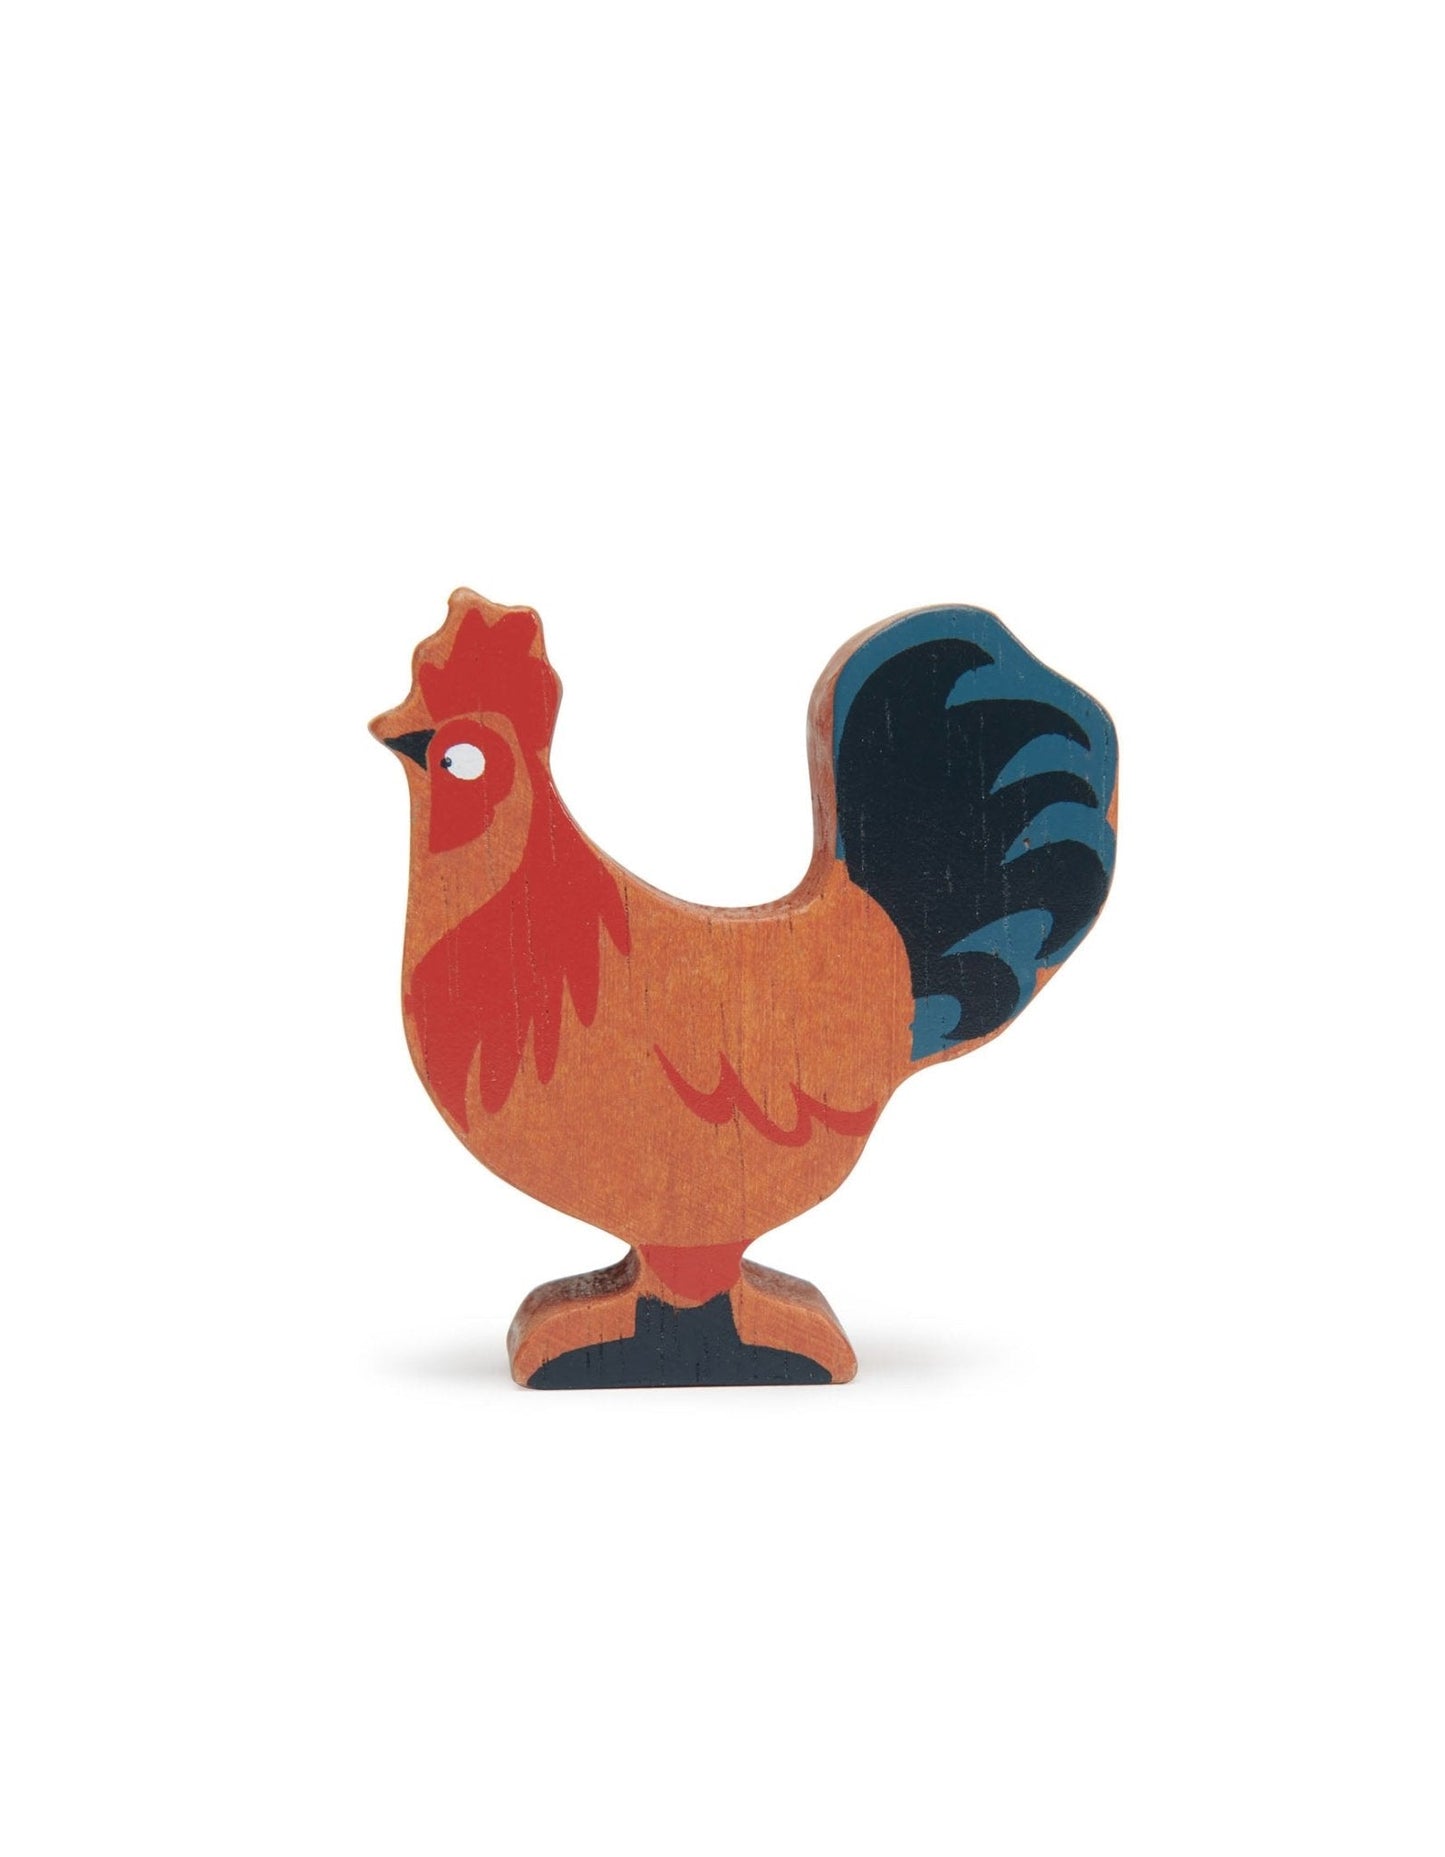 Wooden Farmyard Animal - Rooster